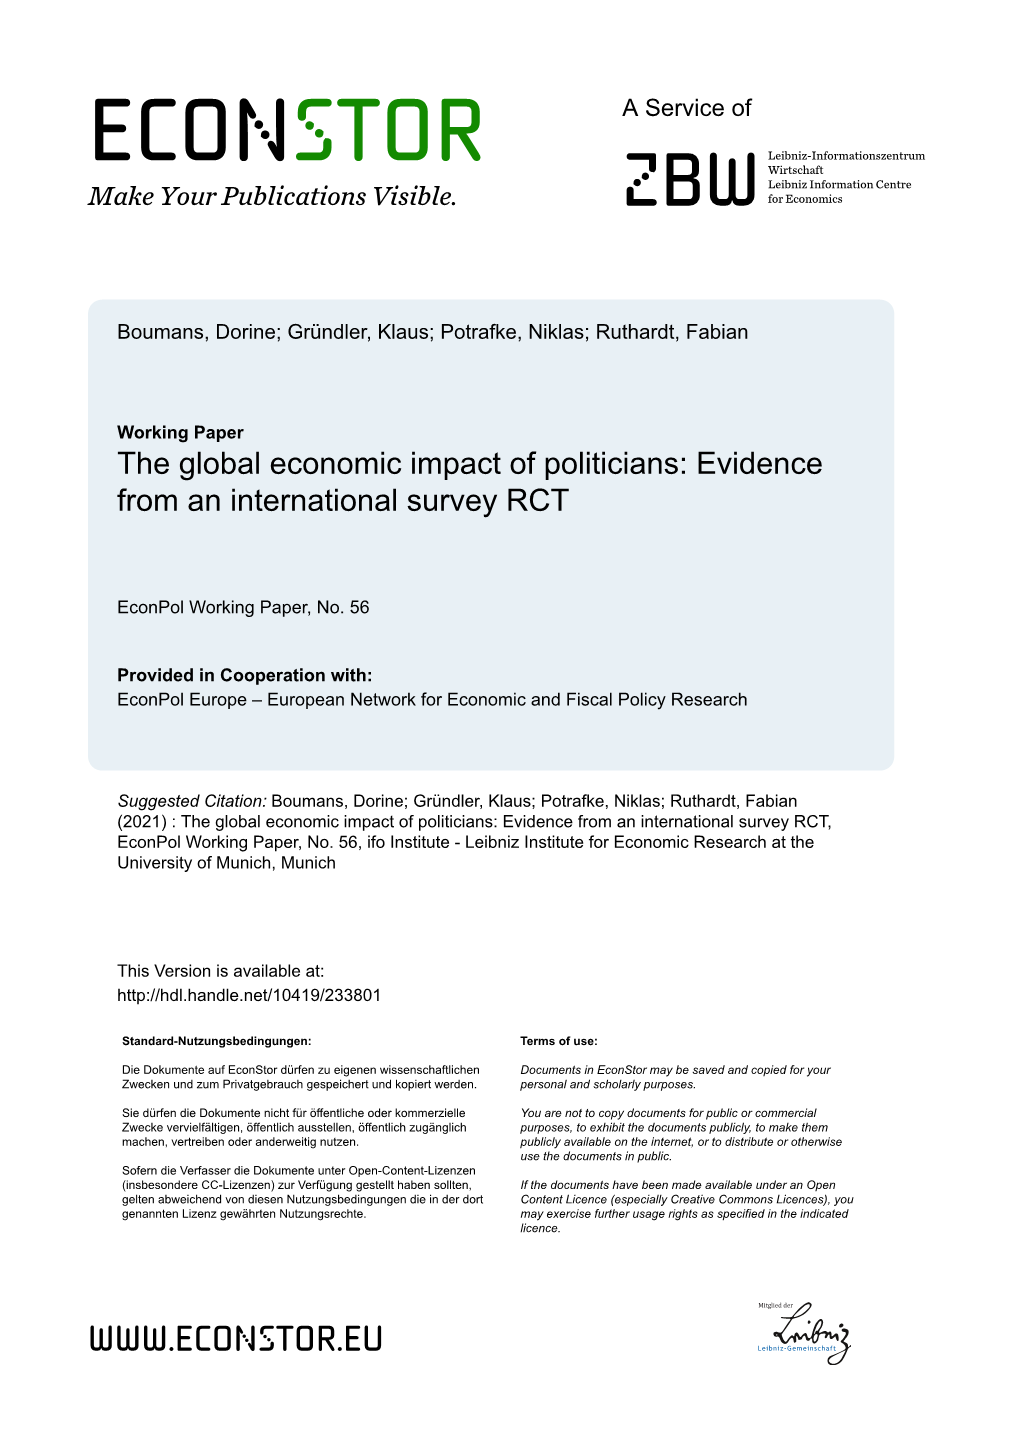 The Global Economic Impact of Politicians: Evidence from an International Survey RCT